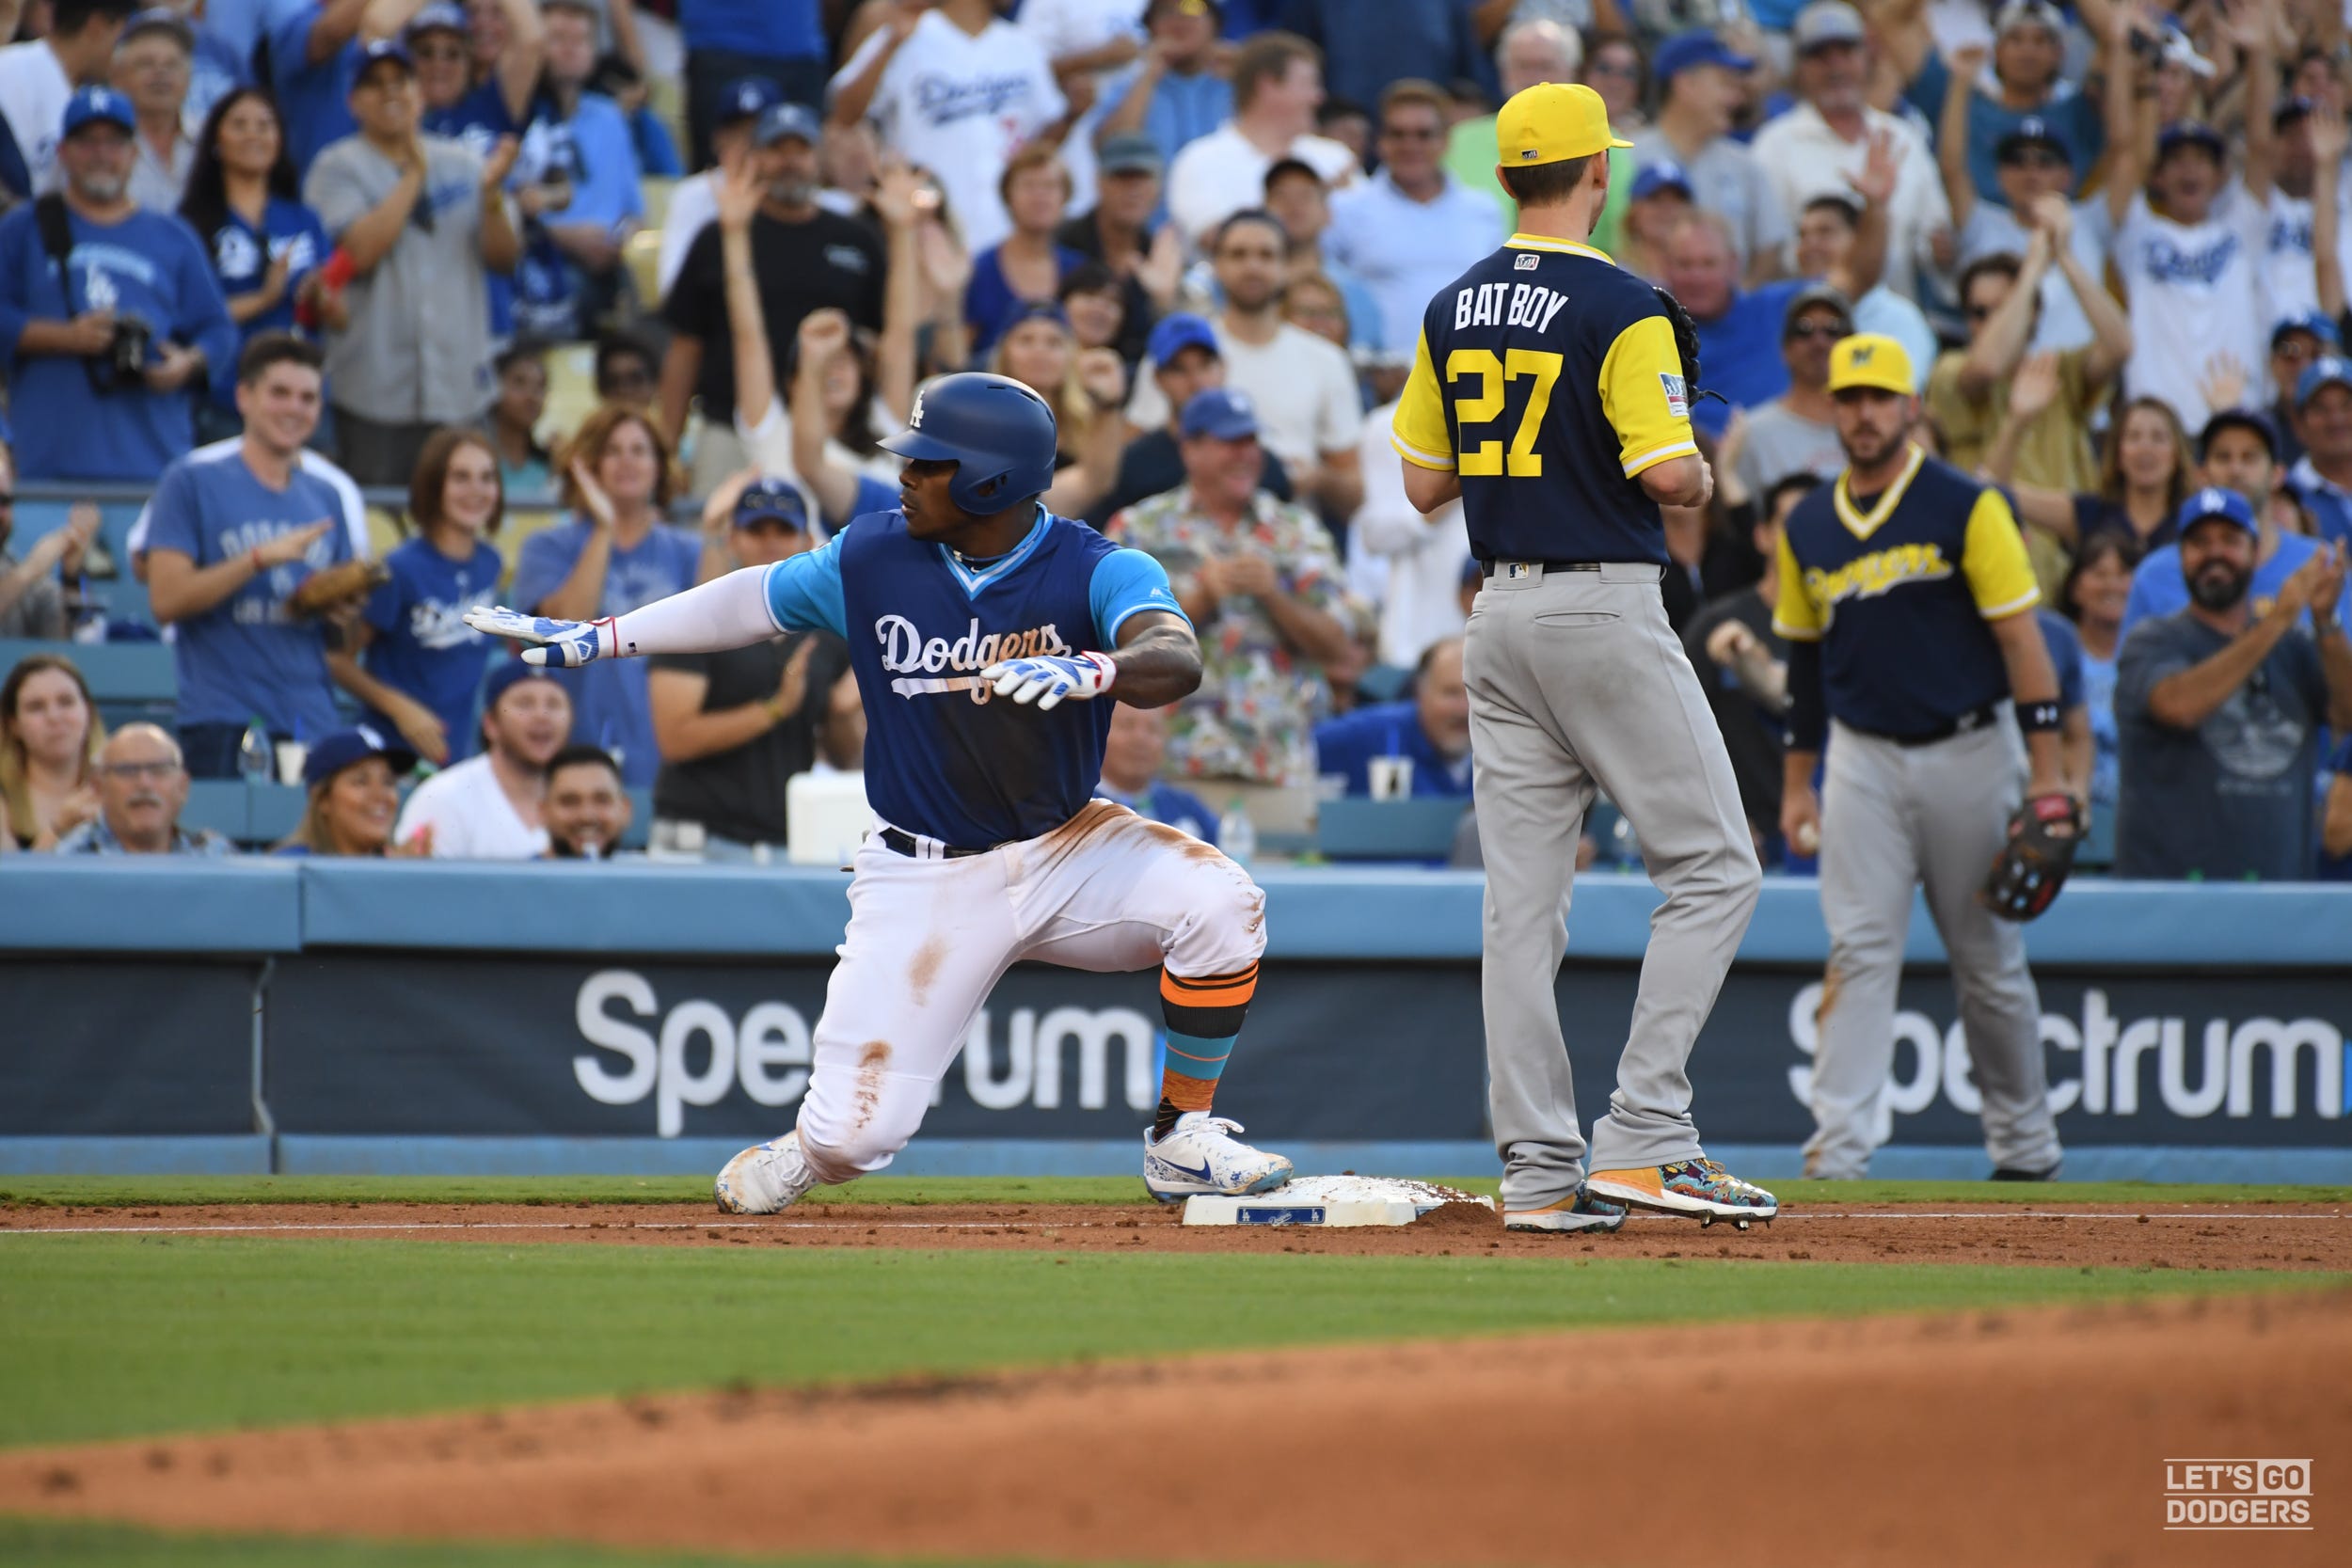 Photoblog: Game 2 vs. Brewers. 08.26 Brewers 3, Dodgers 0, by Matthew Mesa